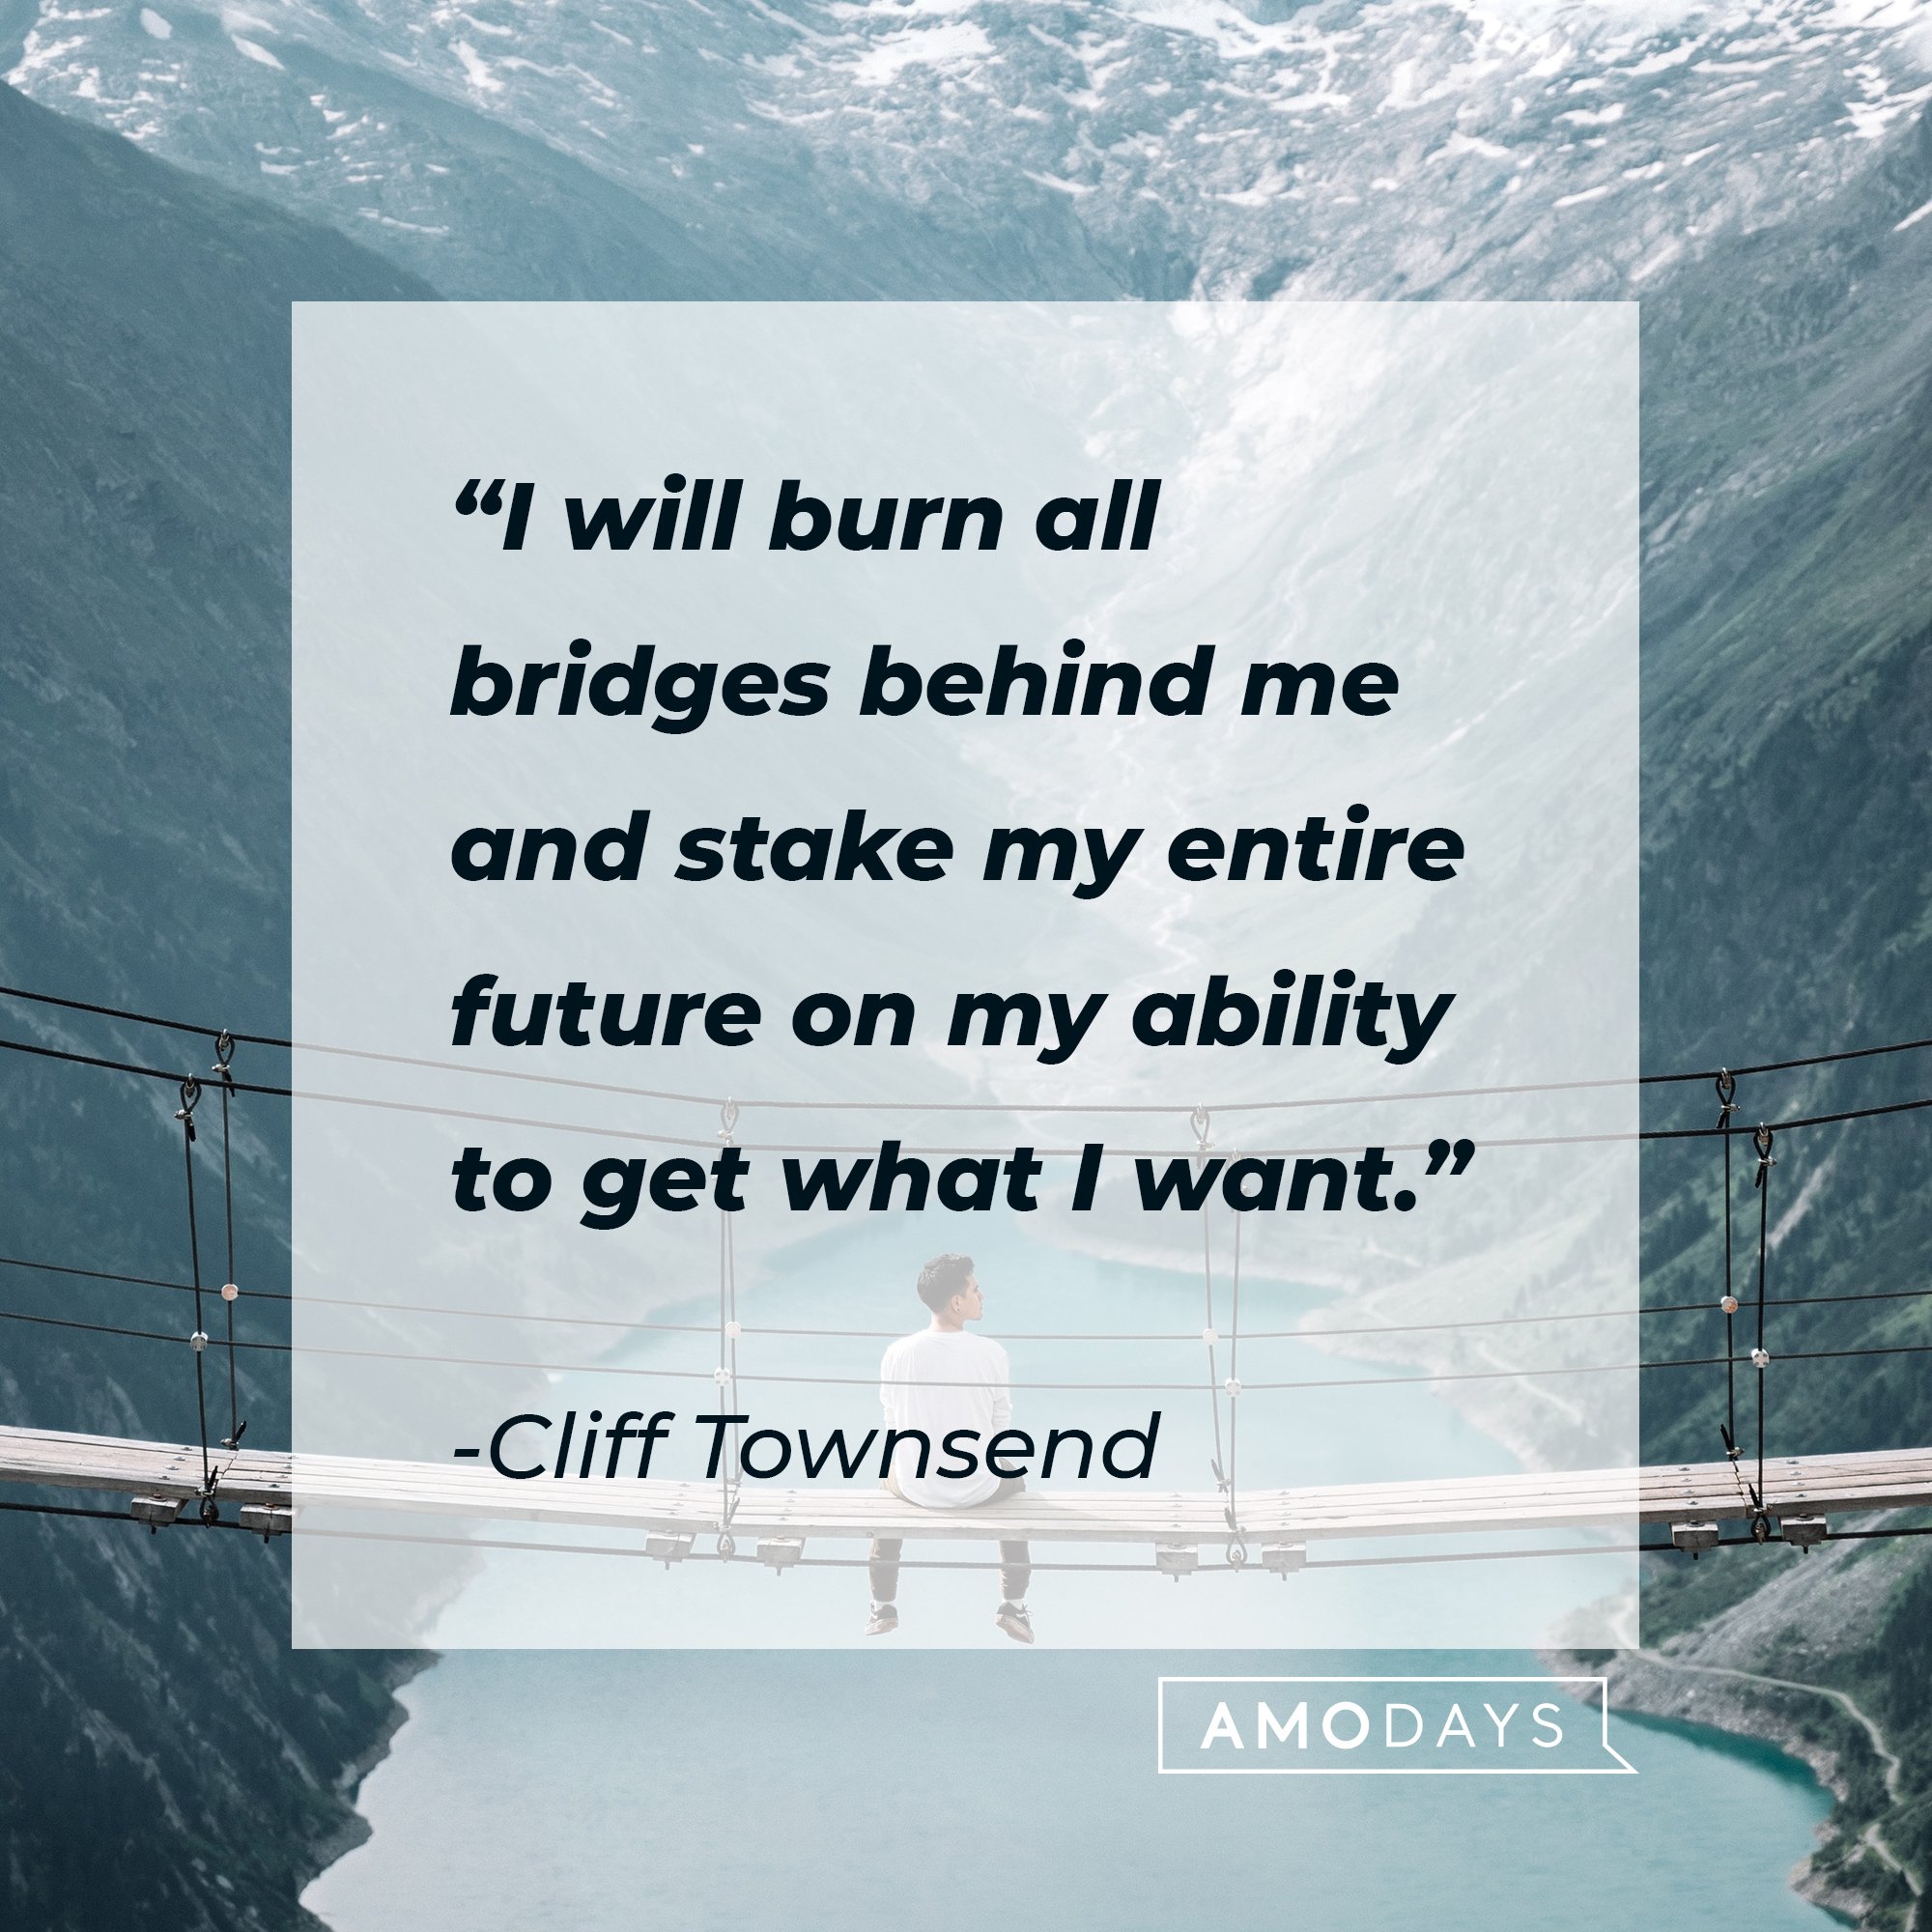 Cliff Townsend’s quote: "I will burn all bridges behind me and stake my entire future on my ability to get what I want." | Image: AmoDays